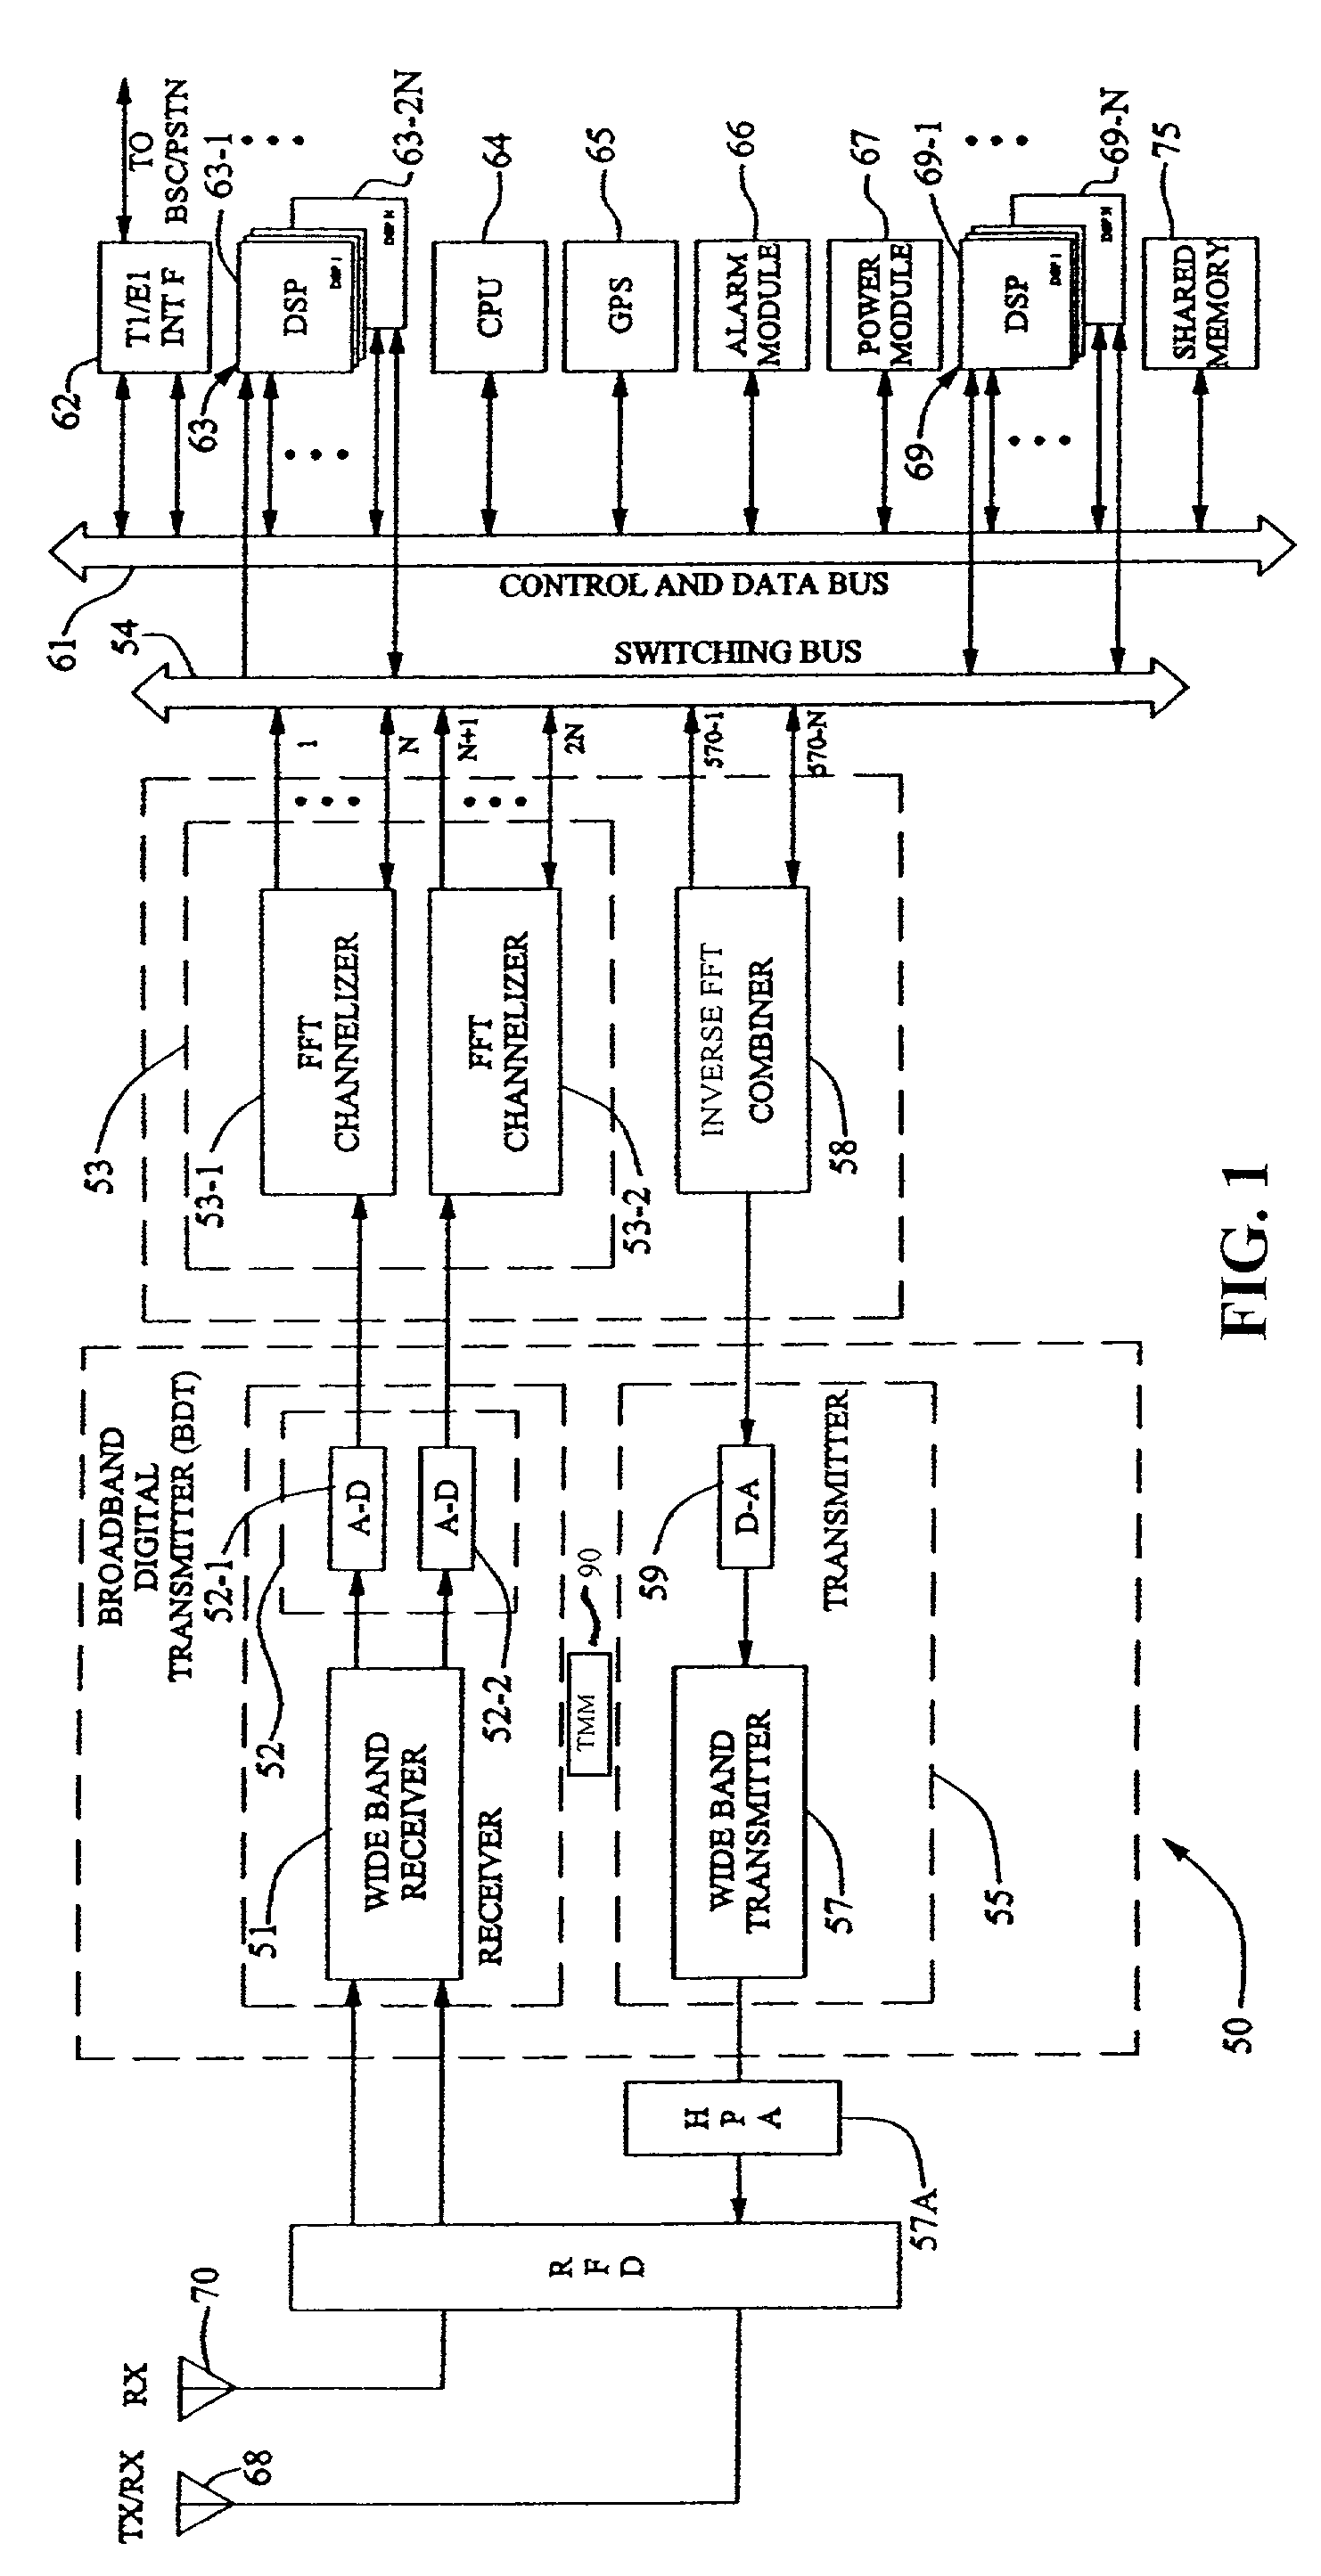 Method and apparatus for equalization in transmit and receive levels in a broadband transceiver system